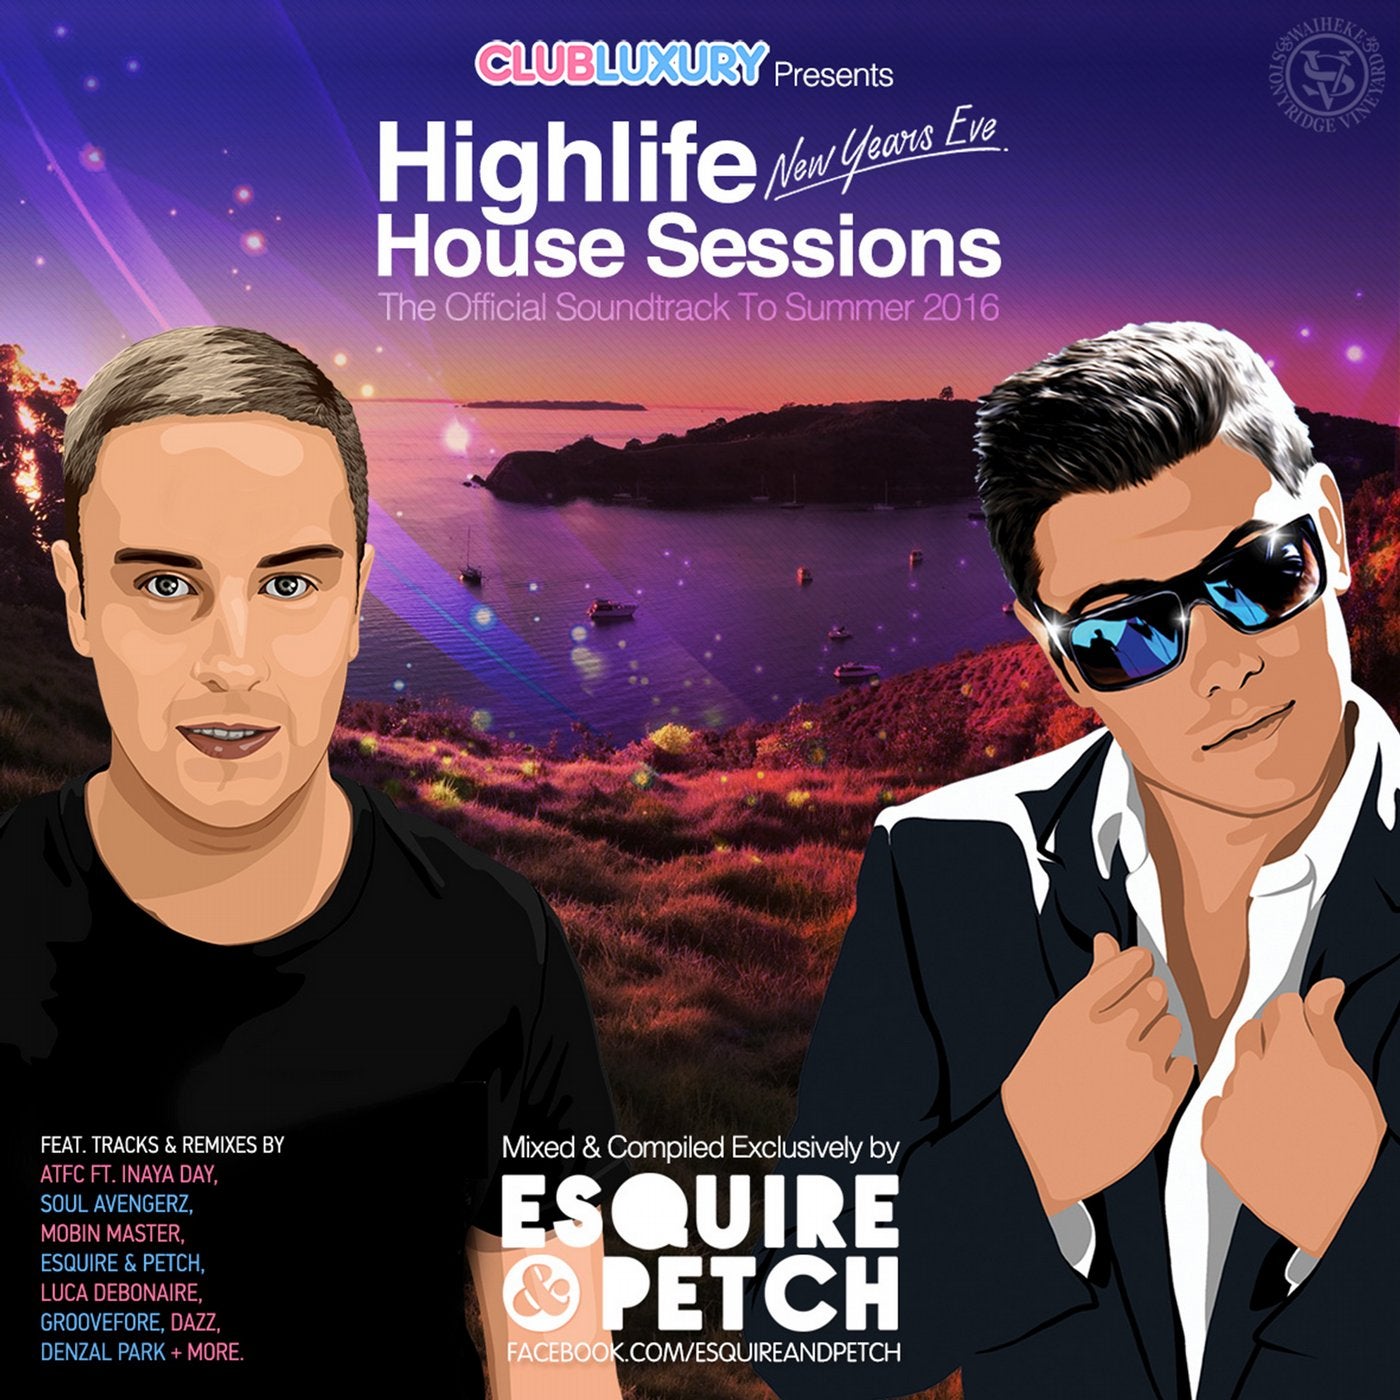 Club Luxury's Highlife NYE House Sessions (Mixed by ESQUIRE & PETCH)